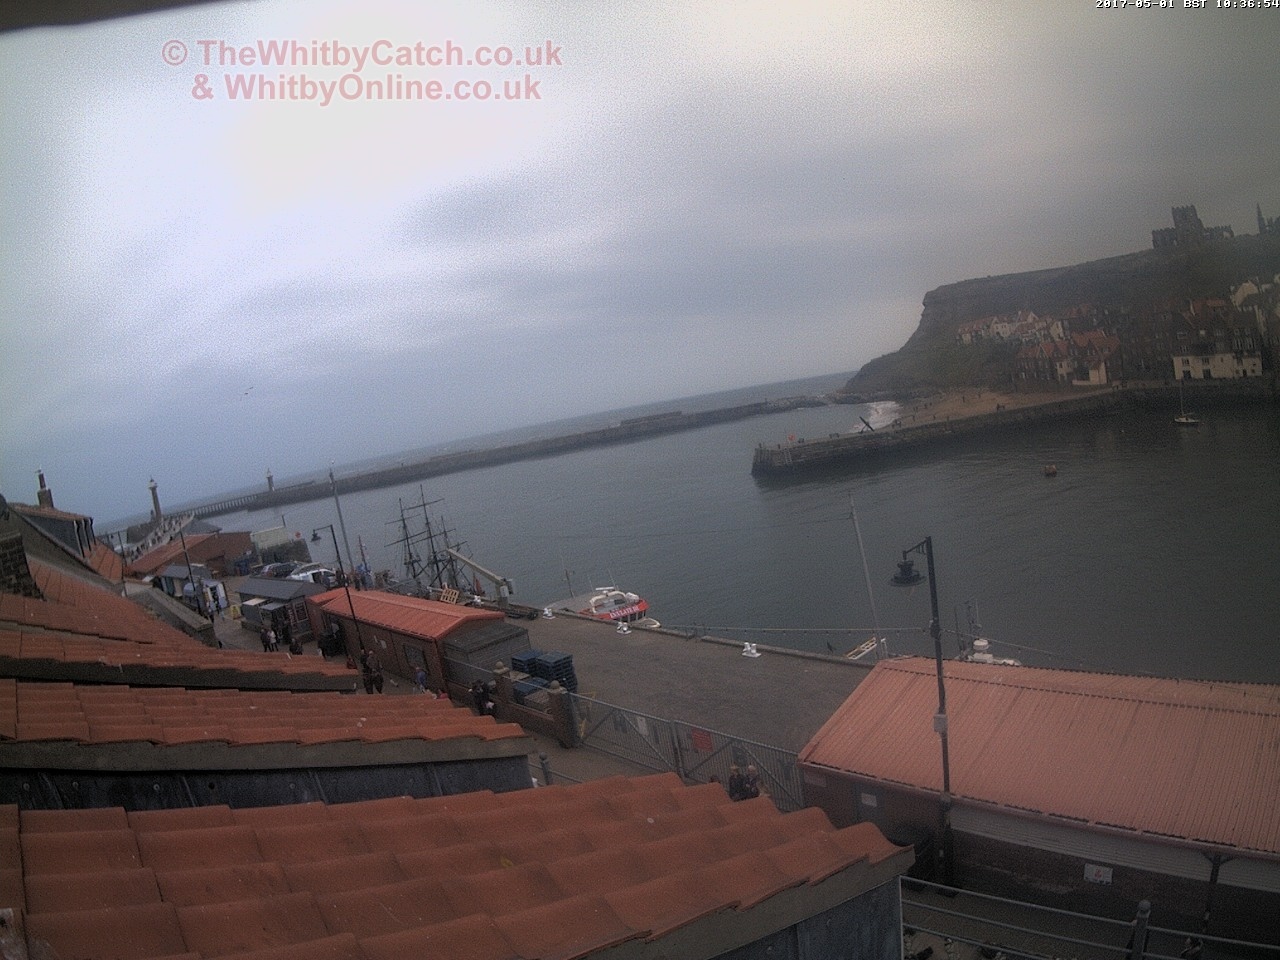 Whitby Mon 1st May 2017 10:37.